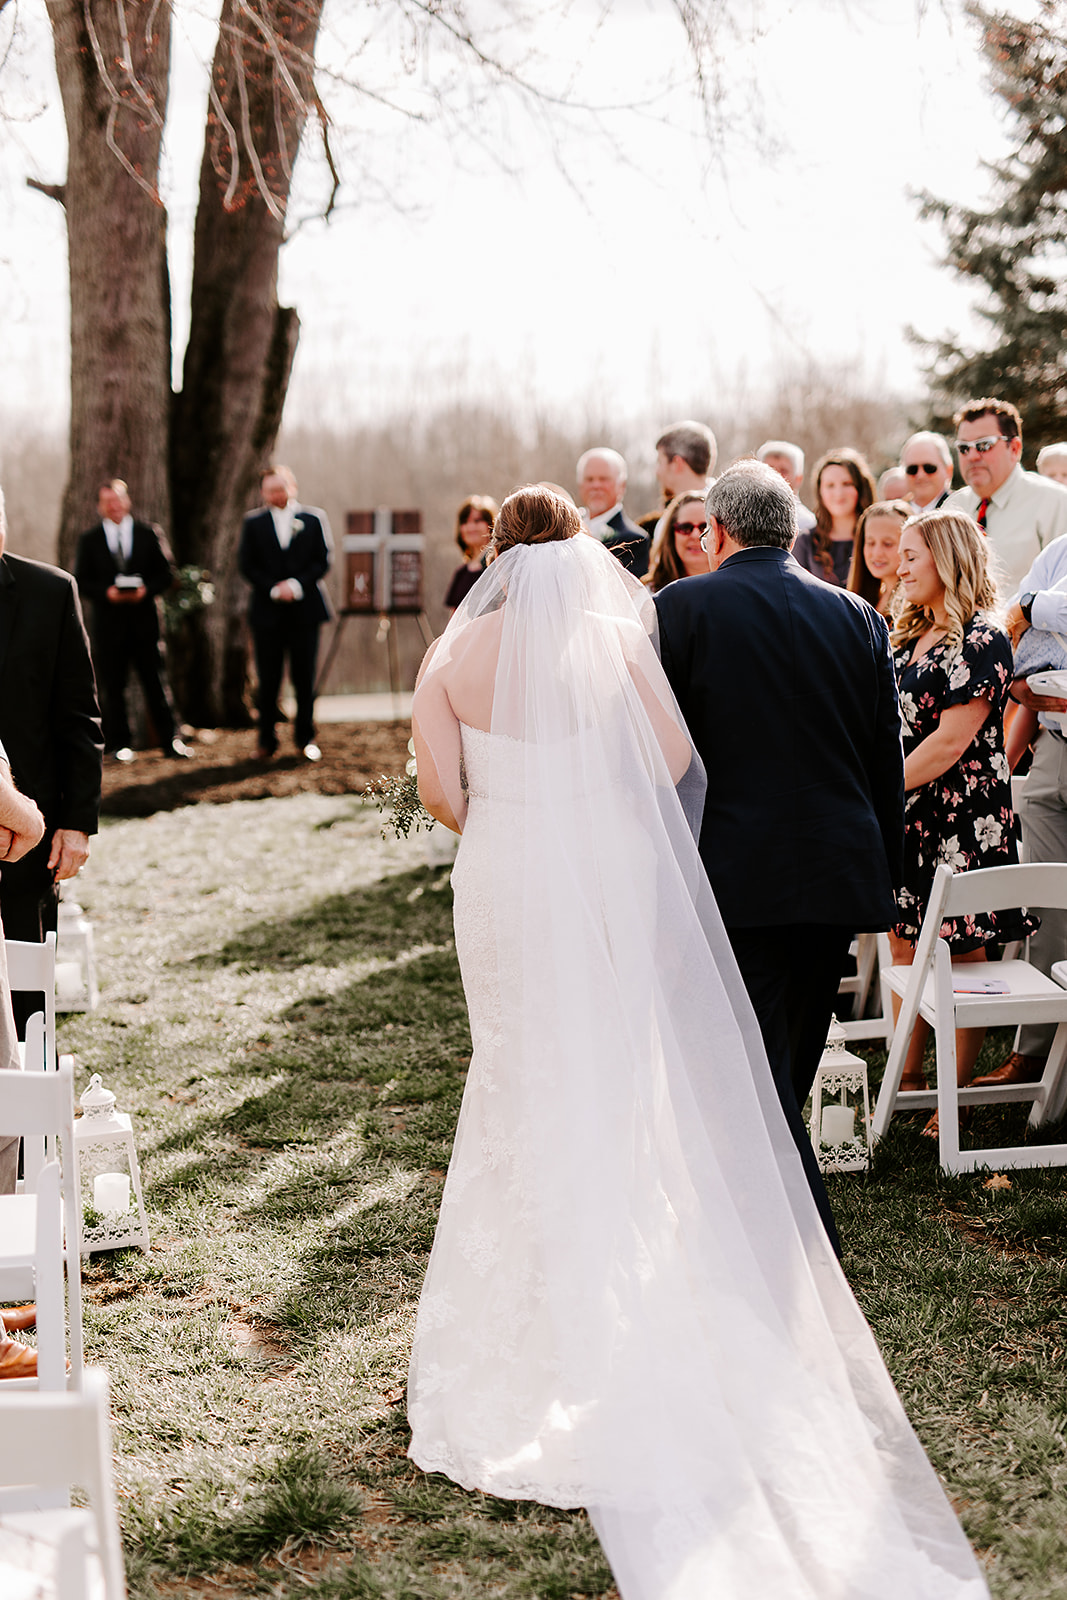 Lauren_and_Andrew_Mustard_Seed_Gardens_Noblesville_Indiana_by_Emily_Wehner_Photography-508.jpg